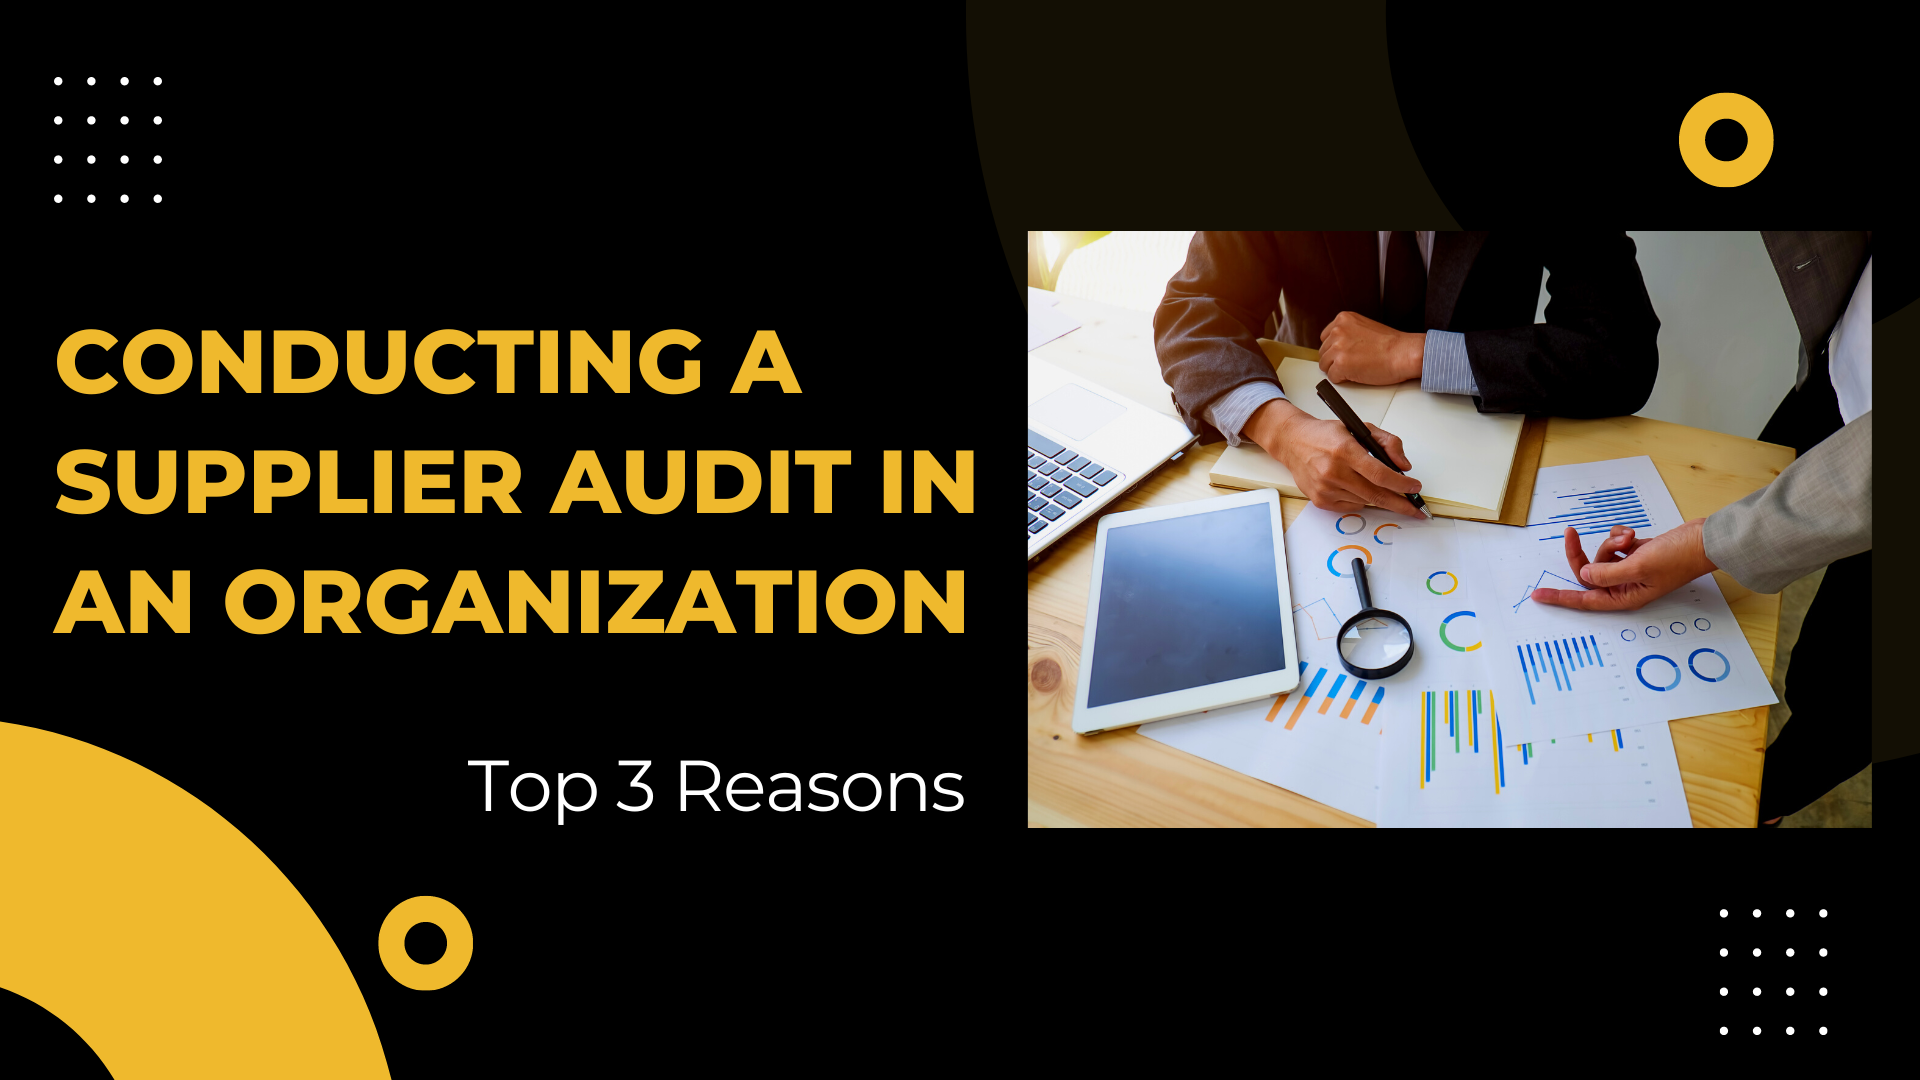 Top 3 Reasons To Conduct A Supplier Audit In An Organization ...